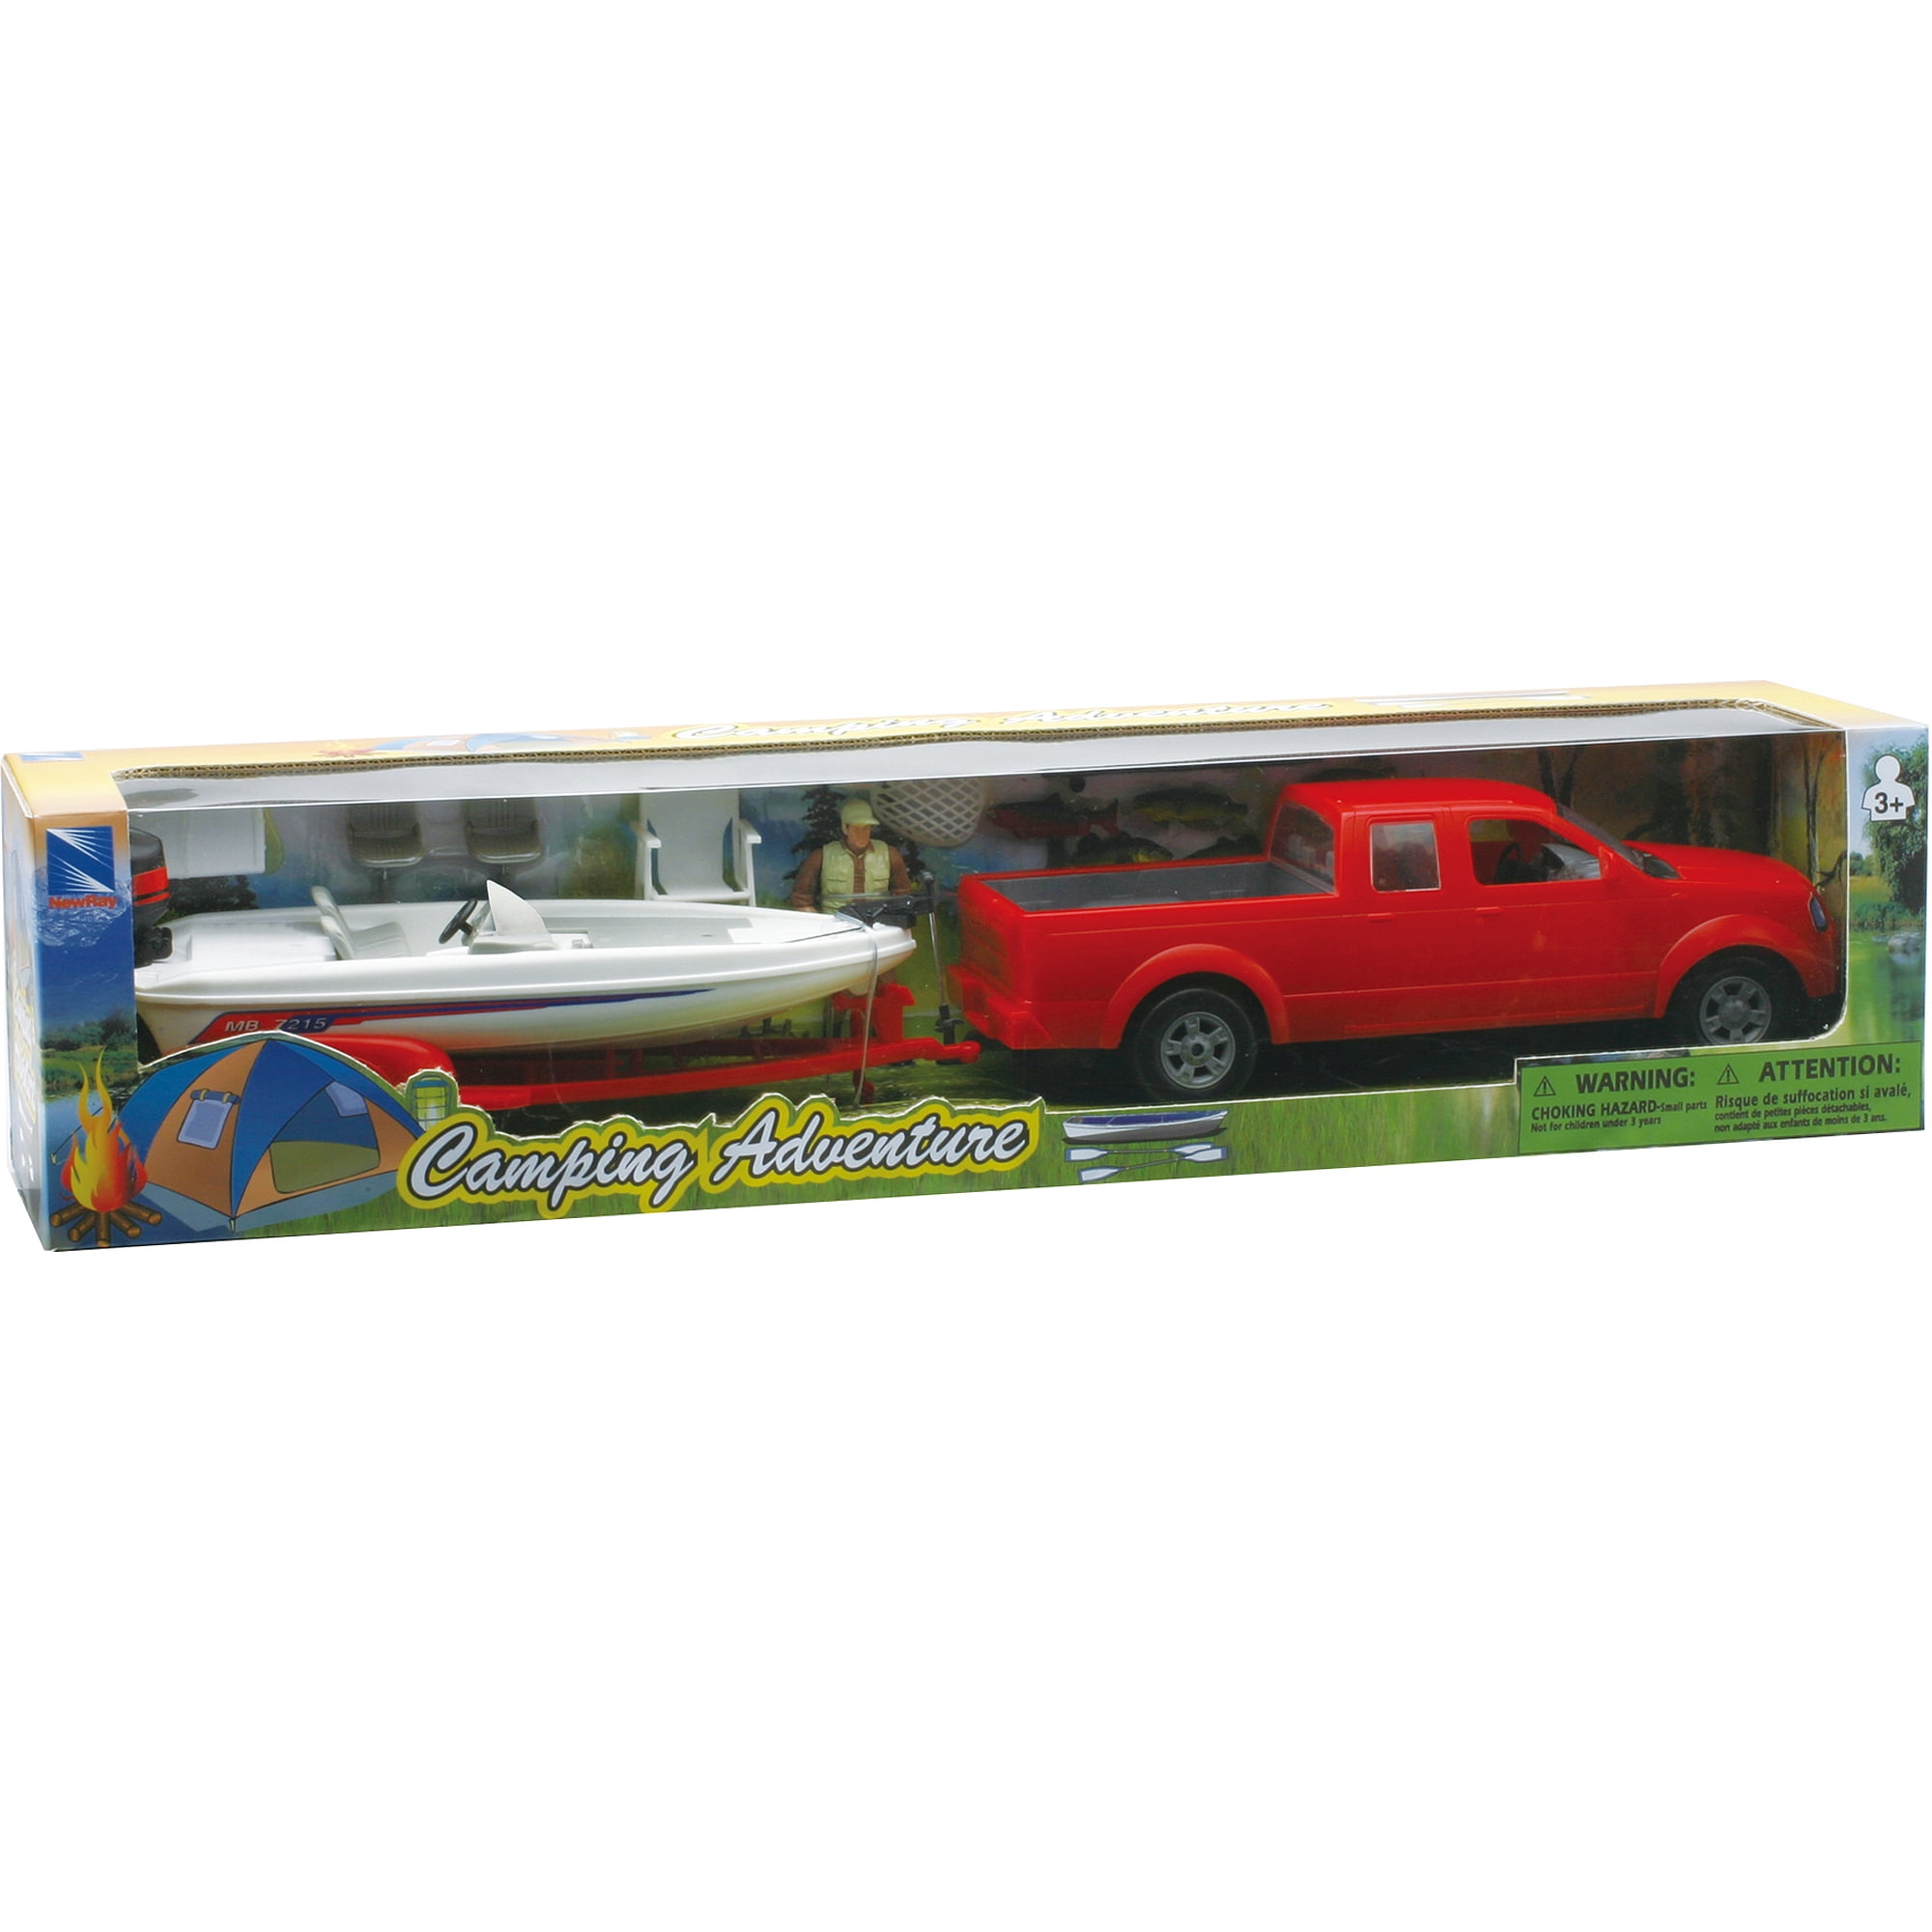 truck and boat trailer toy